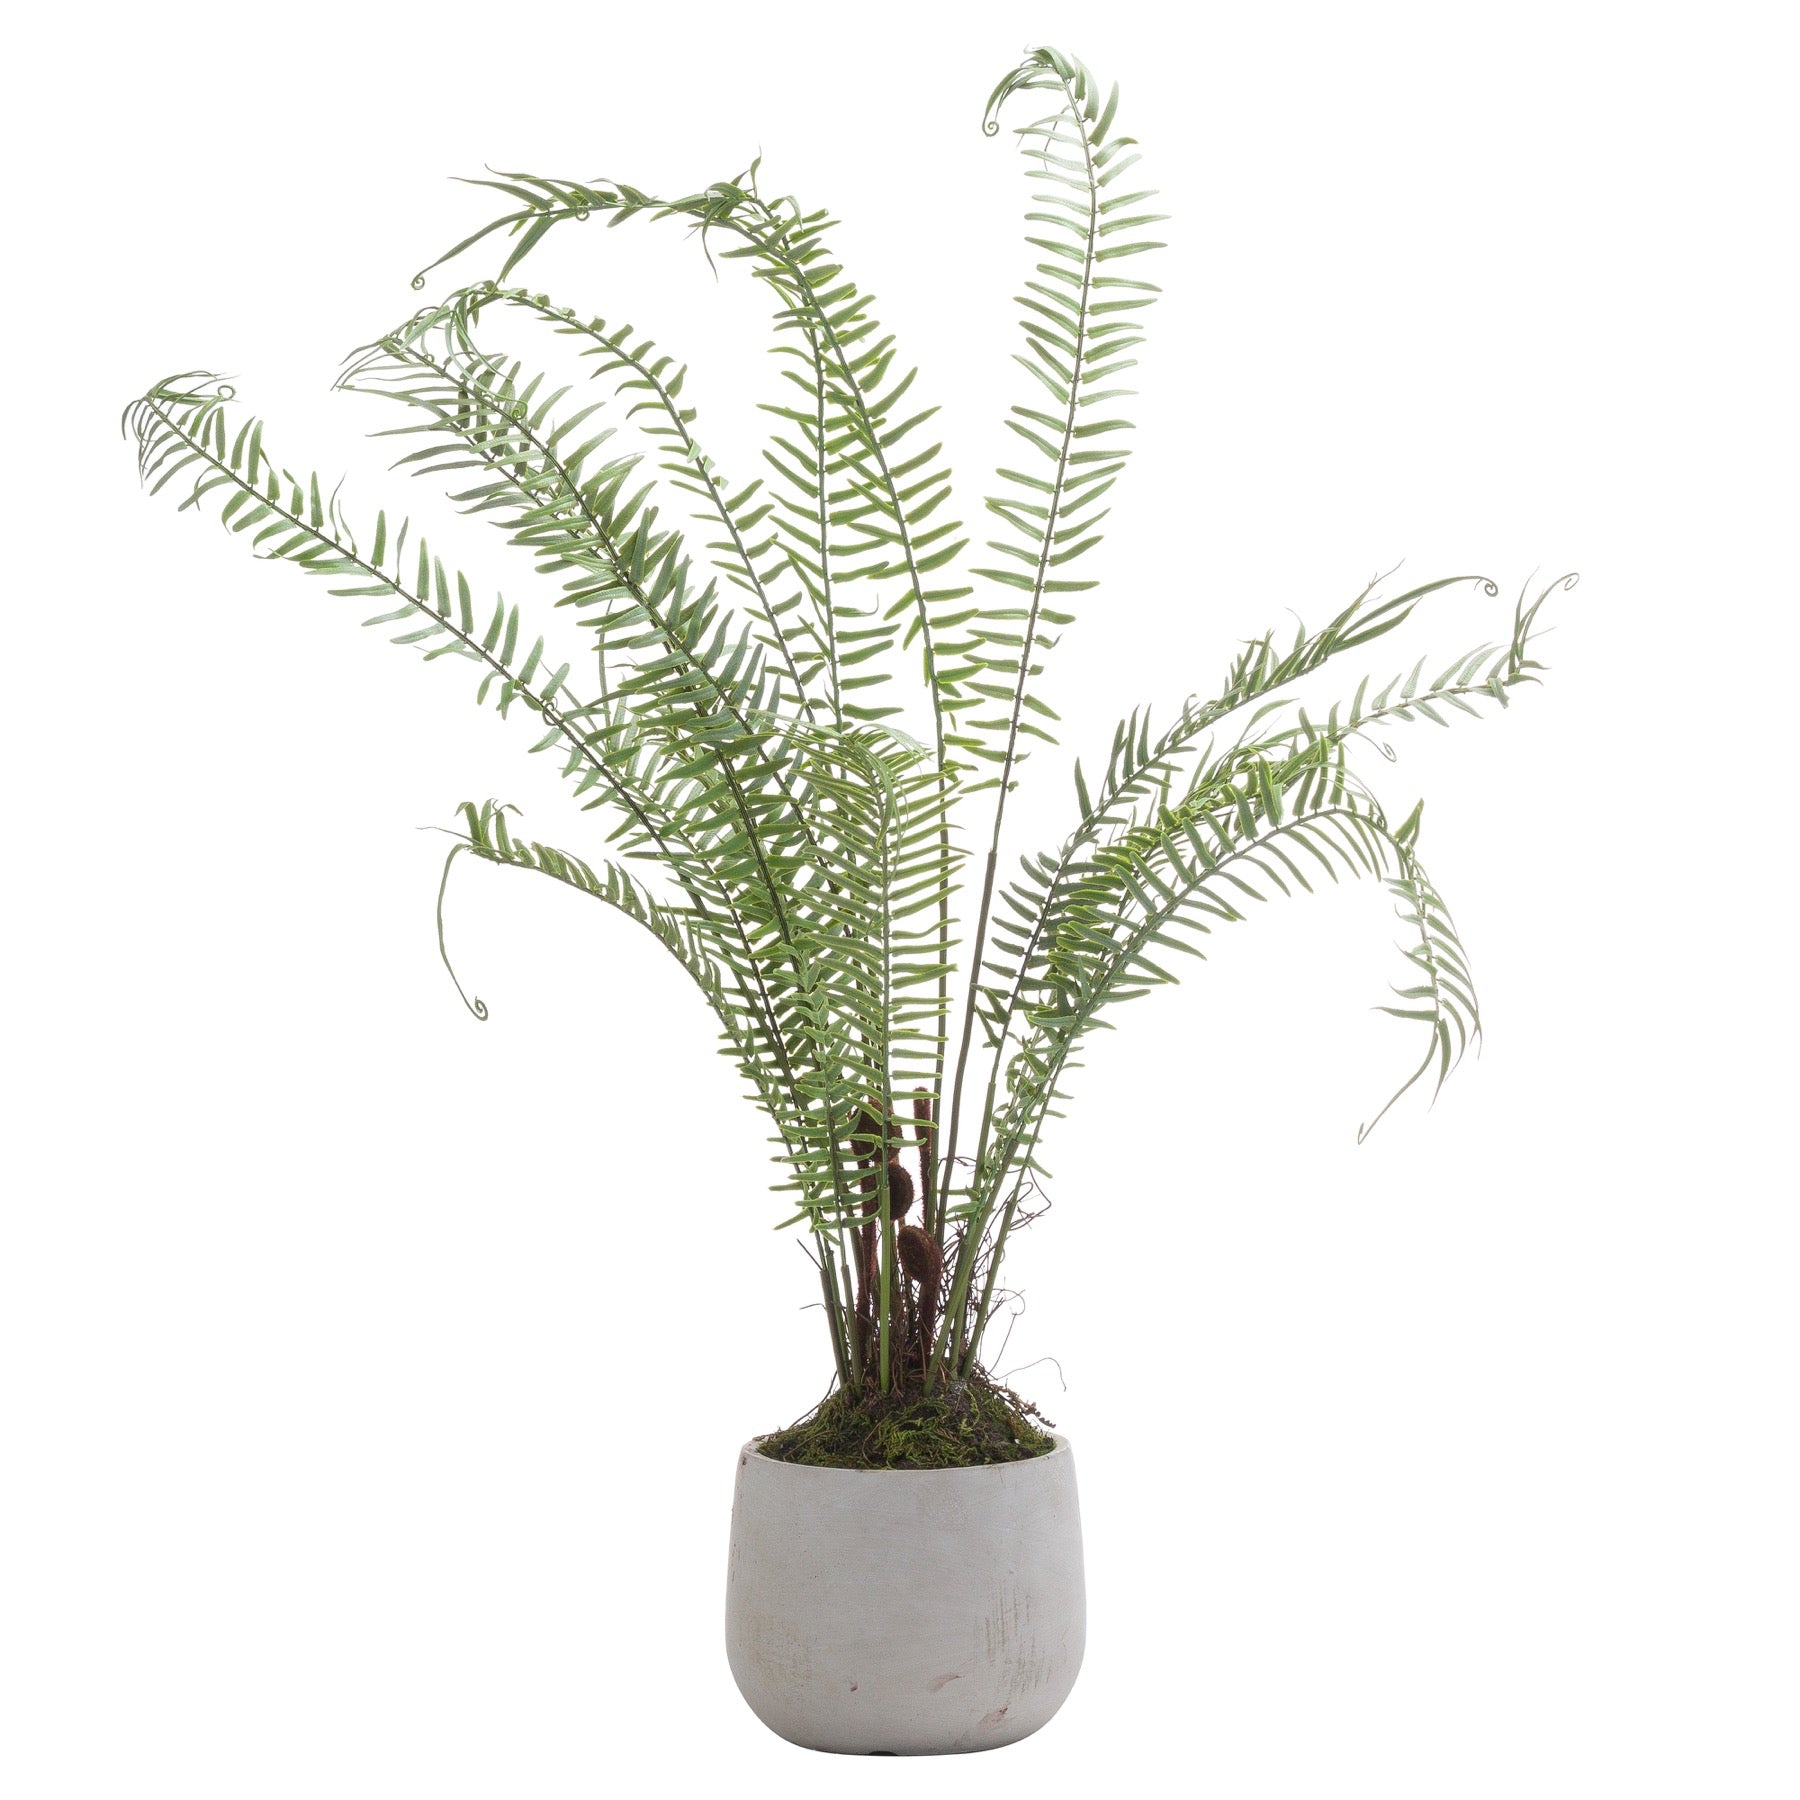 Hill Interiors Boston Large Potted Fern